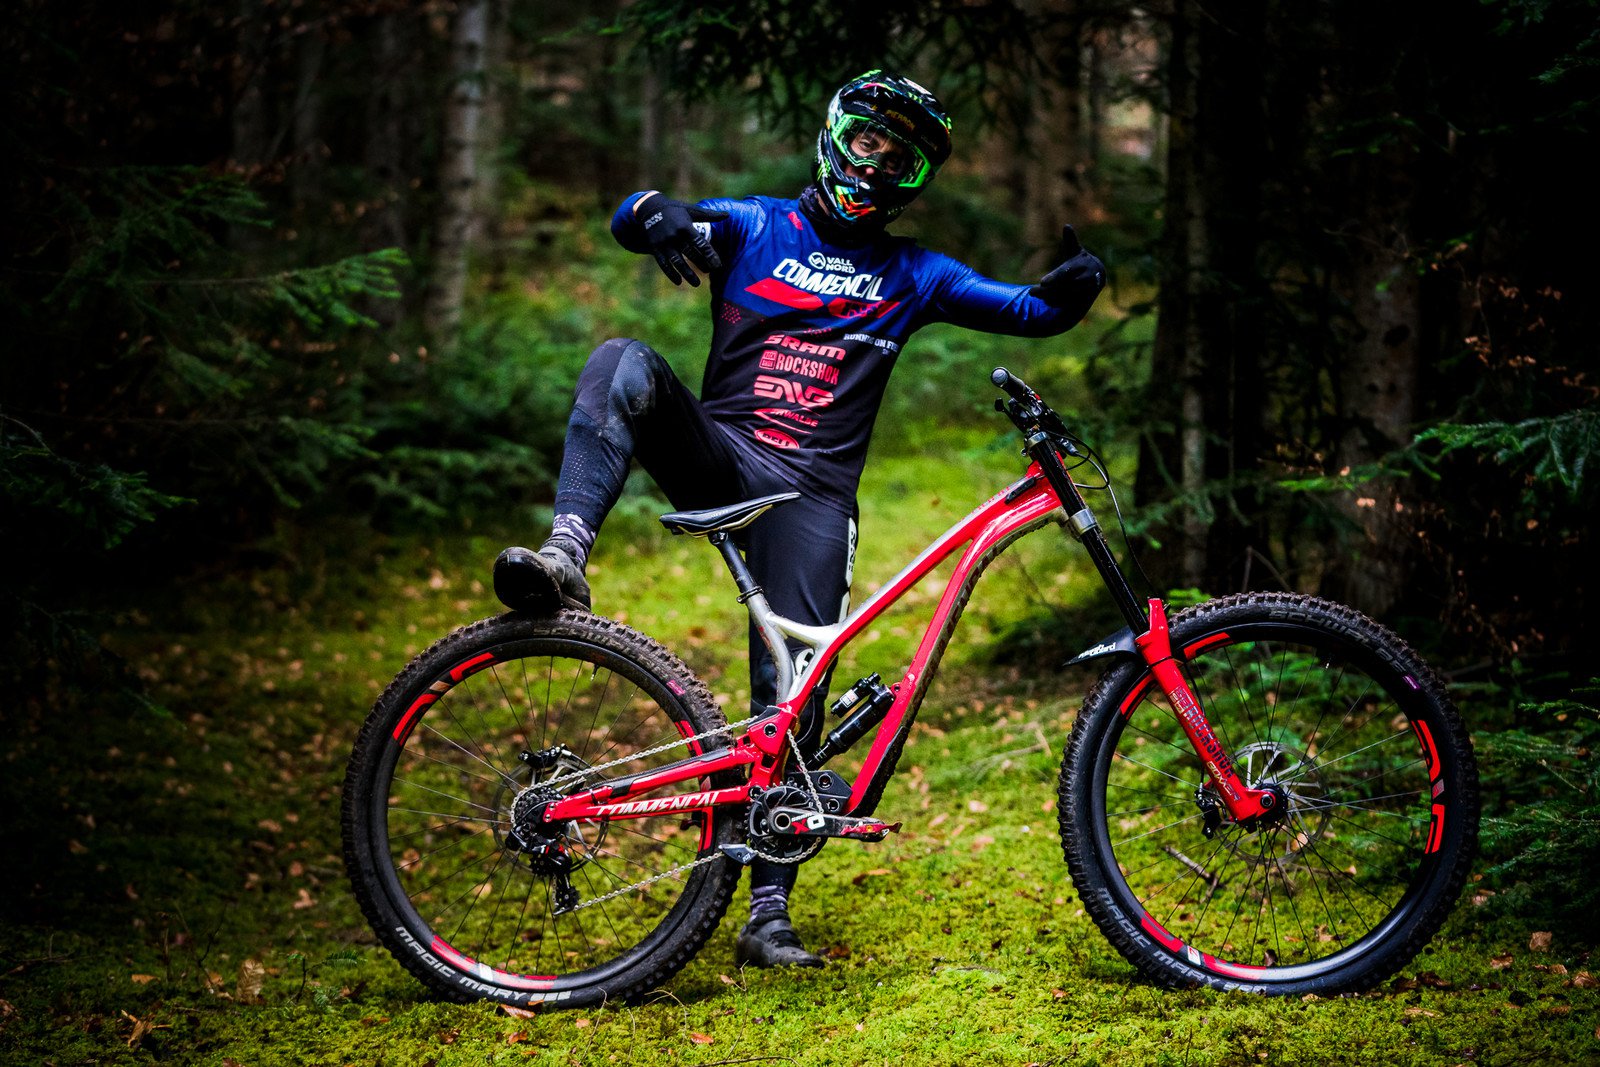 Amaury Pierron and his 2019 Commencal Supreme DH